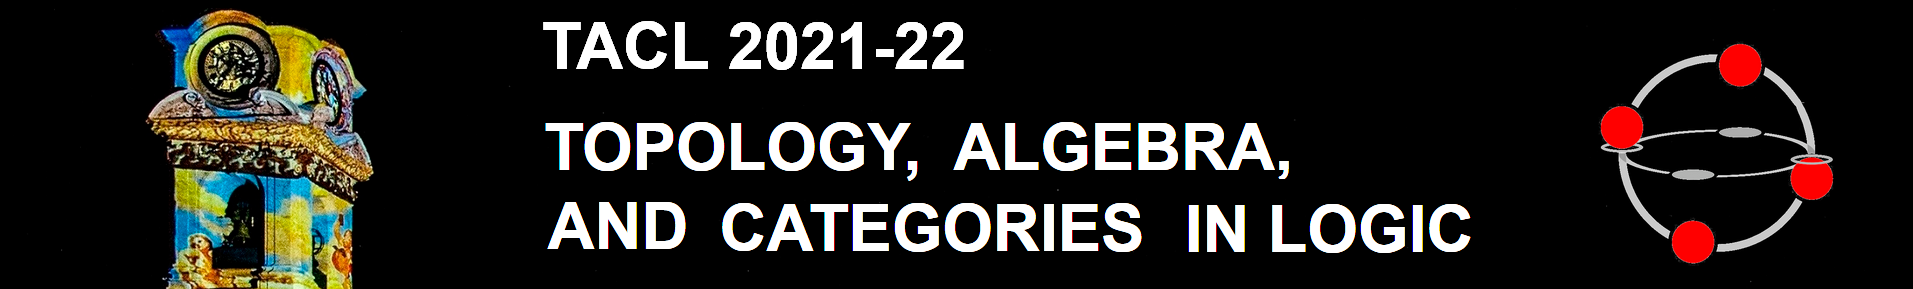 Topology, Algebra and Categories in Logic - TACL 2021-22